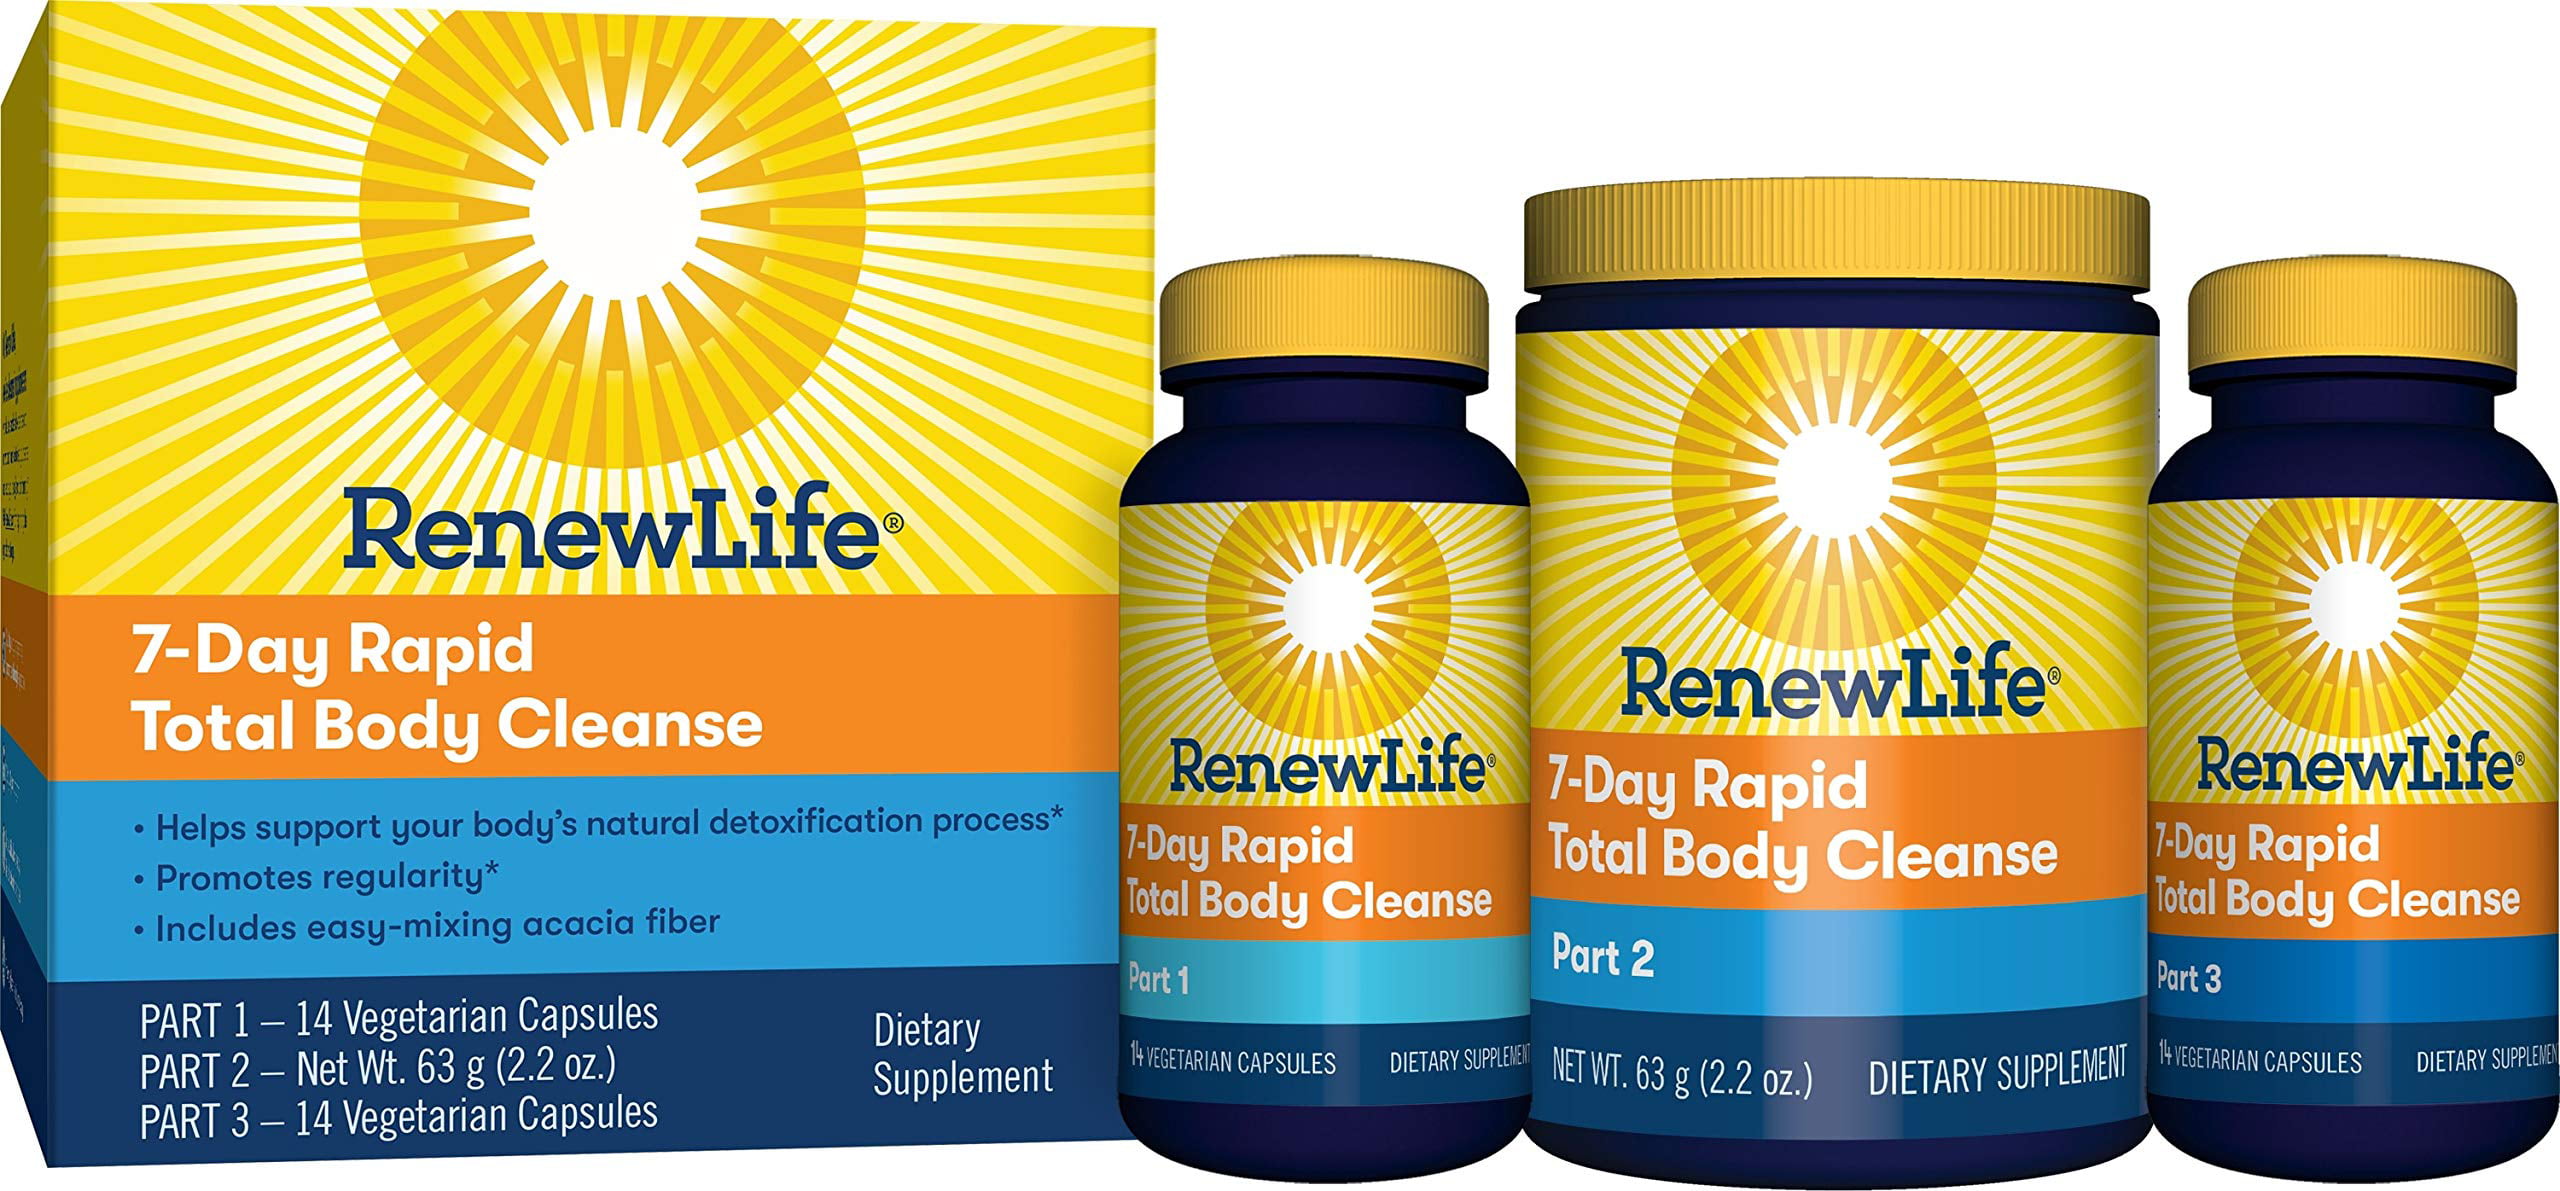 Body cleanse. Solary total Cleanse. Renew Life INTESTINEW. GNC complete body Cleansing. GNC Cleanse 7 Day.